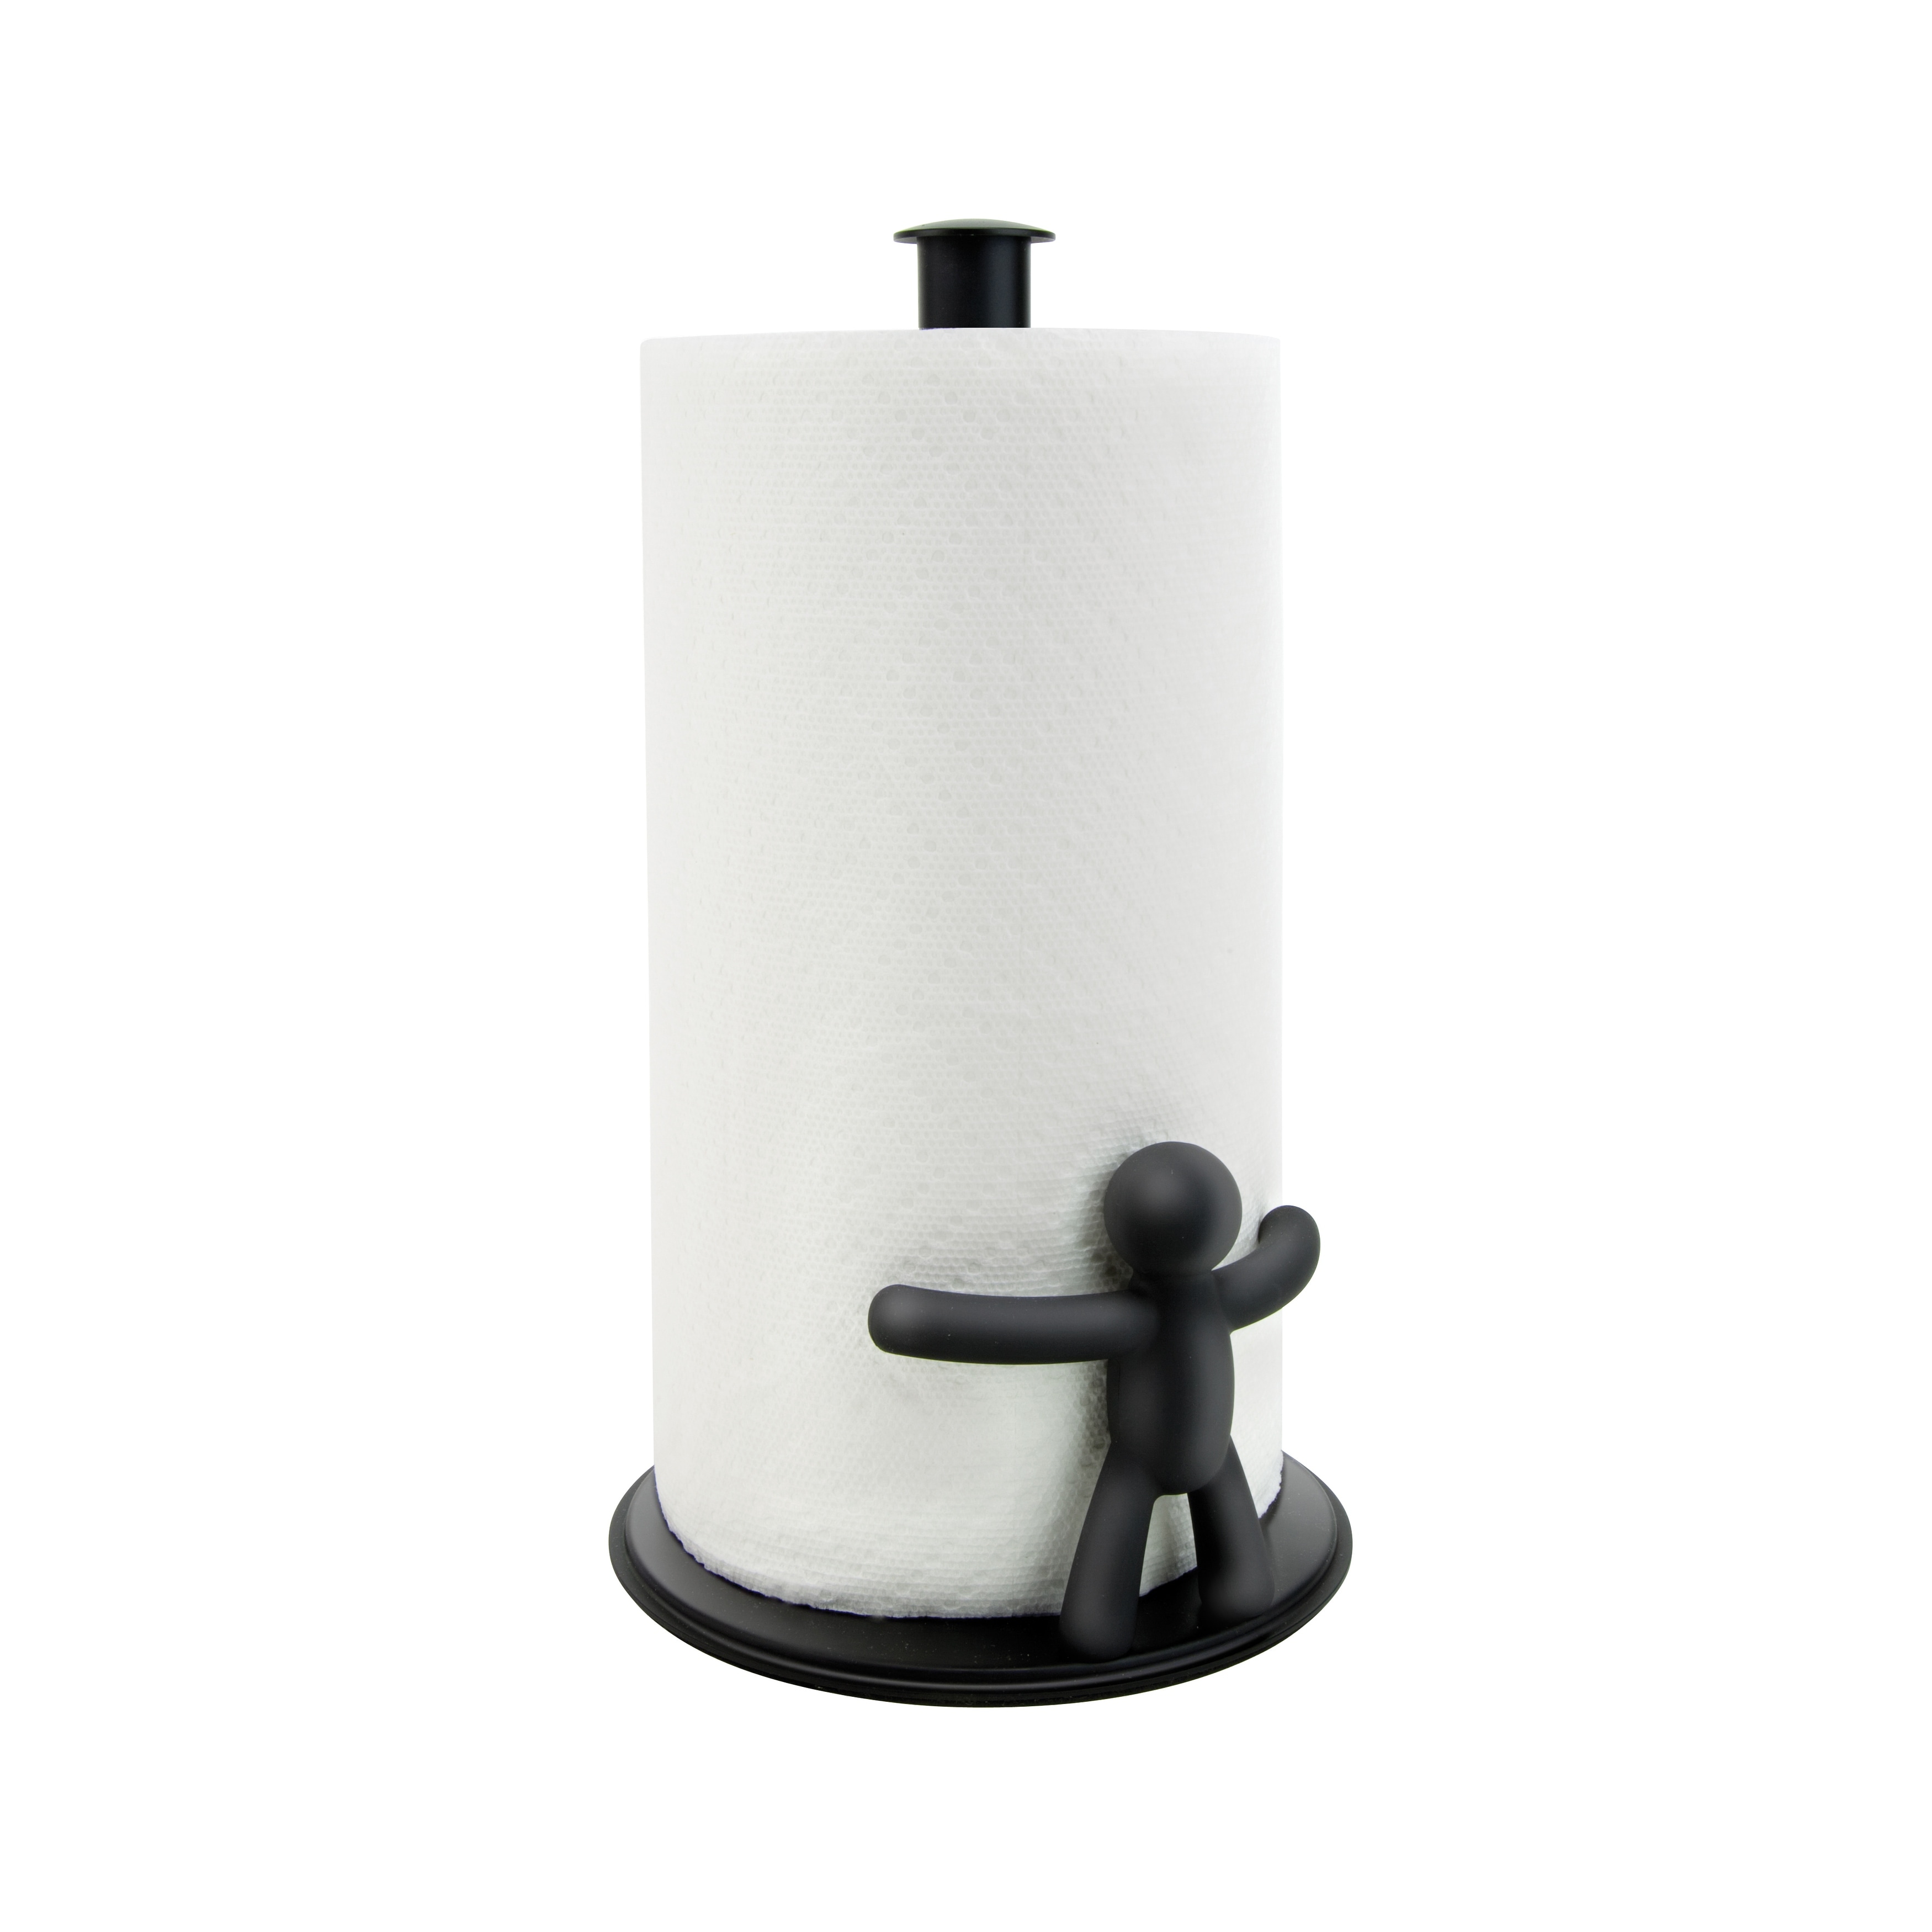 https://ak1.ostkcdn.com/images/products/is/images/direct/803d4e079e89b72759e132d4b00460cbcc6bc7fb/Umbra-Buddy-Counter-Top-Paper-Towel-Holder.jpg